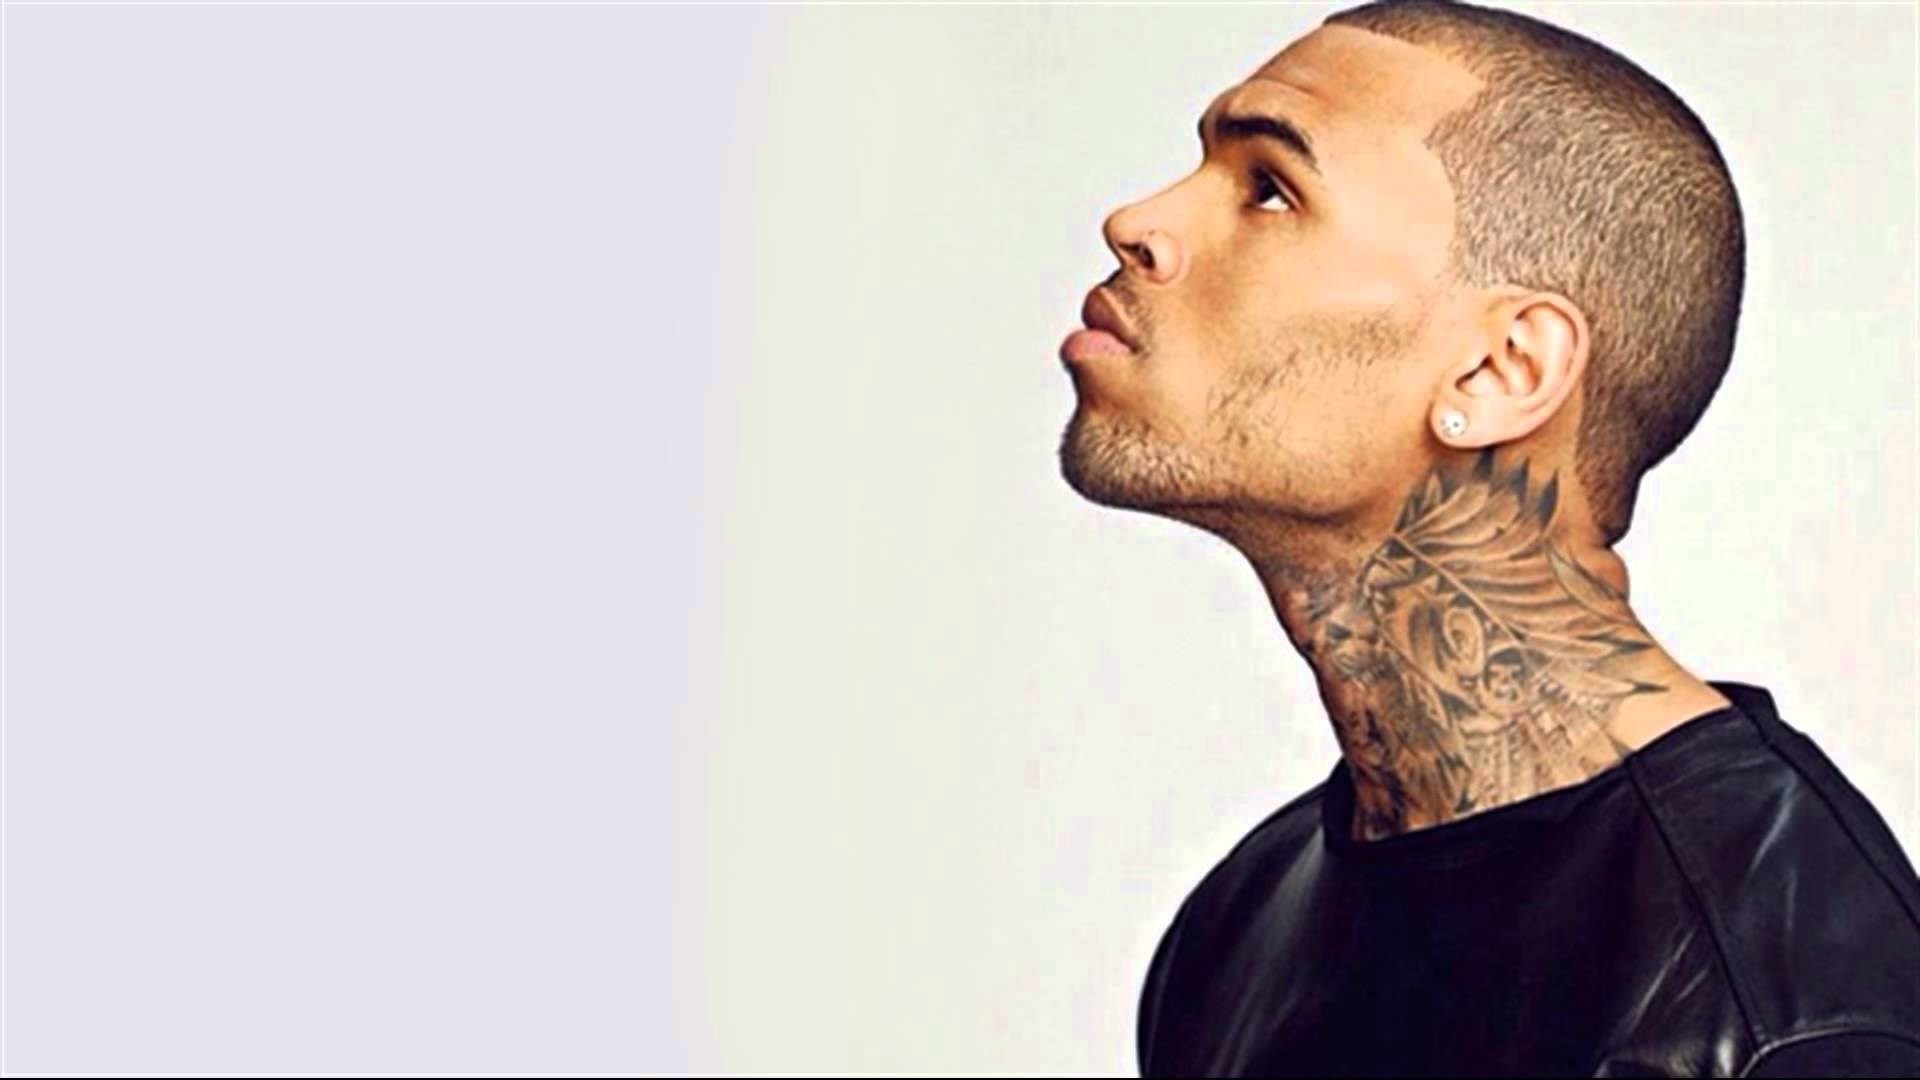 1920x1080  chris brown picture, 111 kB - Phelps Fairy